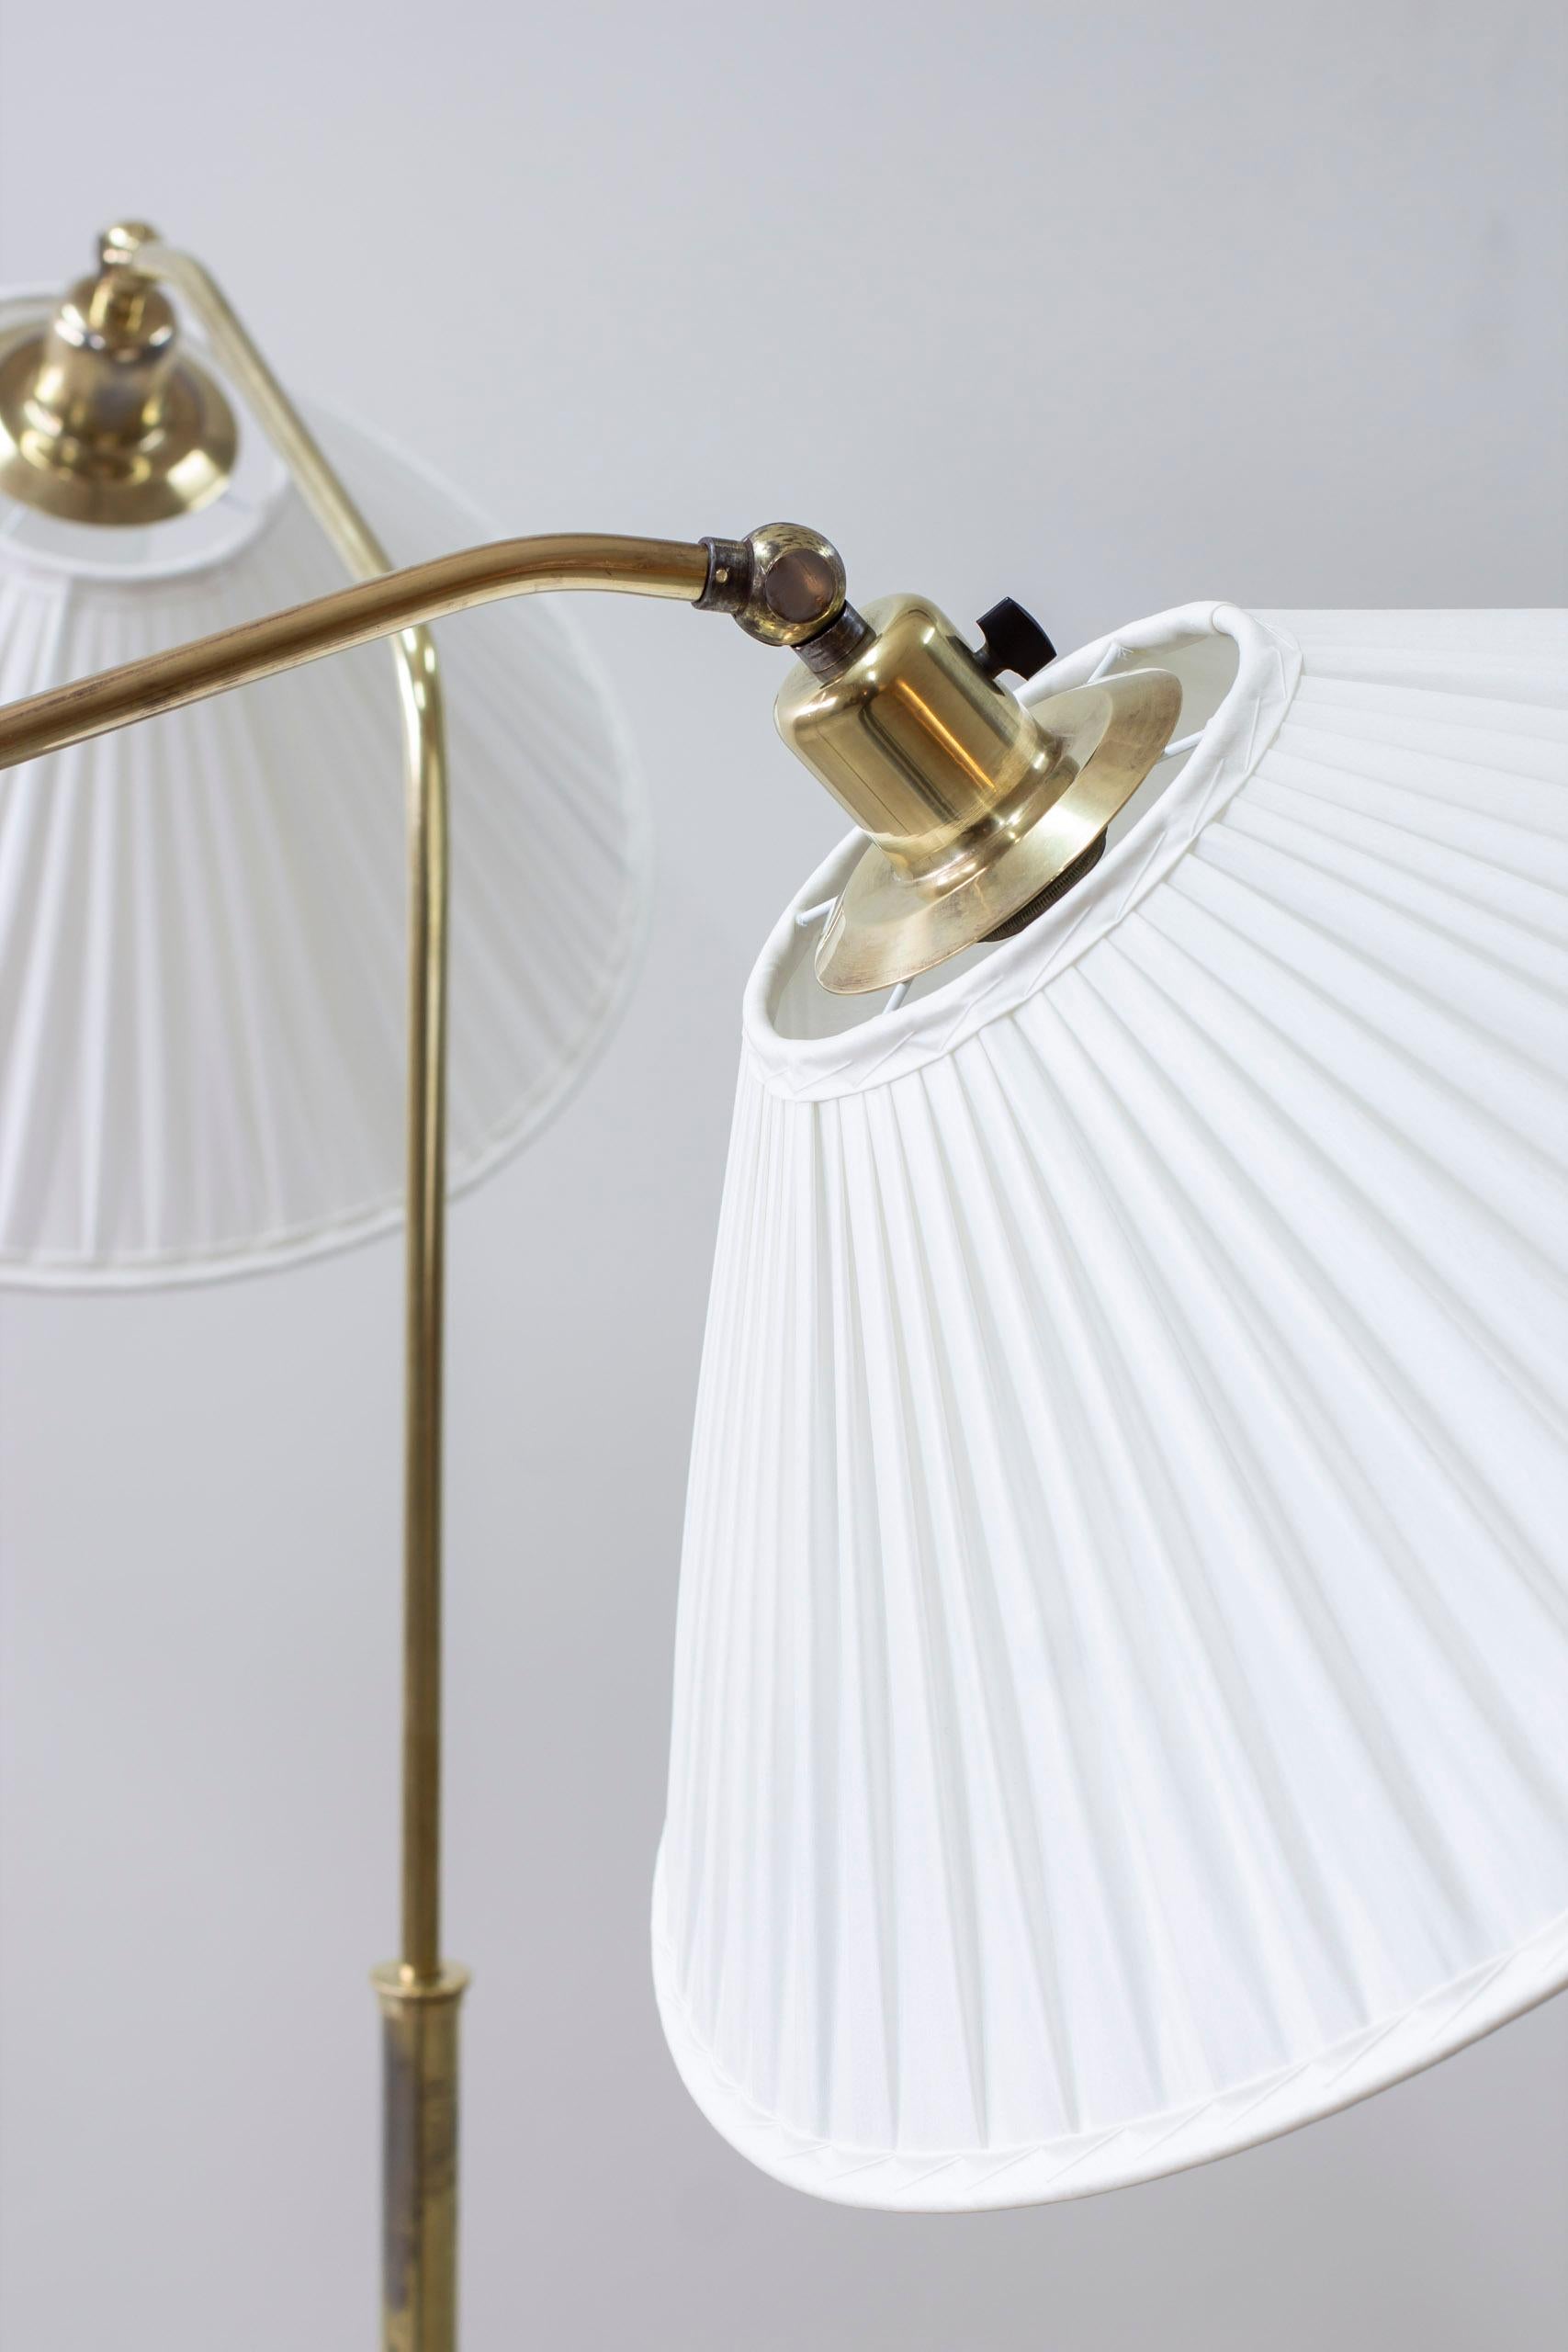 Brass and fabric floor lamps by Harald Elof Notini, Böhlmarks, 1940s For Sale 1